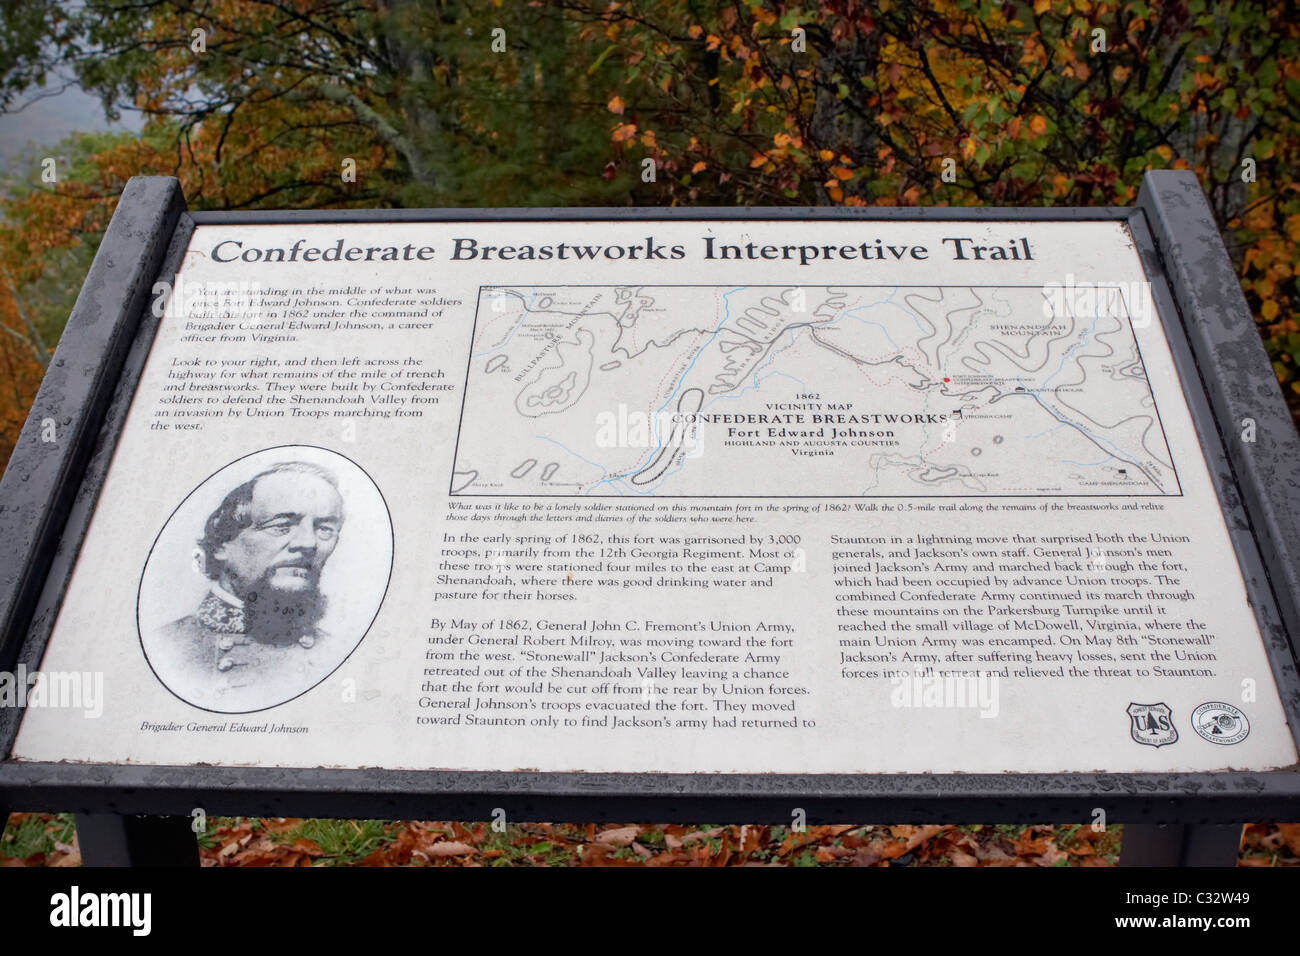 The sign for the Confederate Breastworks, West Augusta, Virginia. Stock Photo